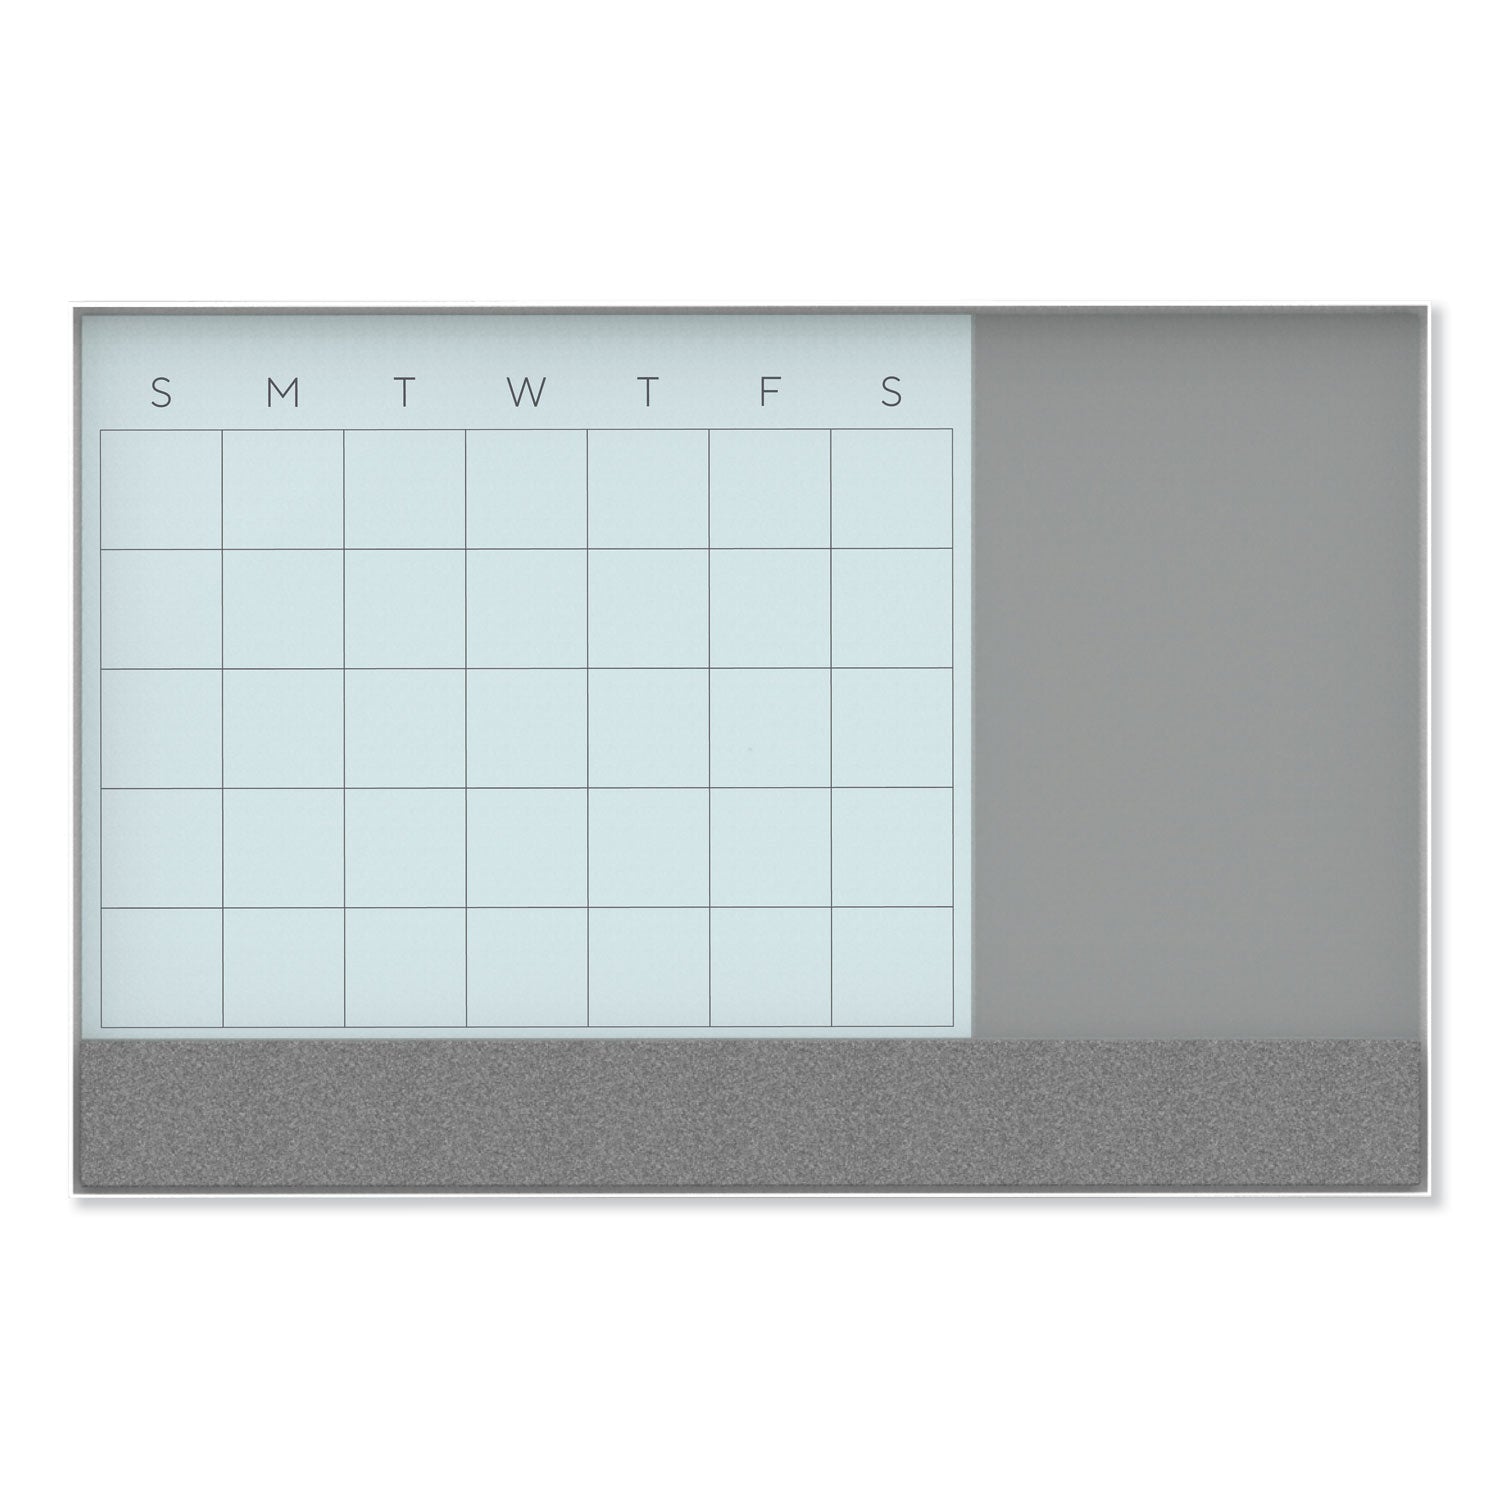 3n1-magnetic-glass-dry-erase-combo-board-35-x-23-month-view-gray-white-surface-white-aluminum-frame_ubr3197u0001 - 1